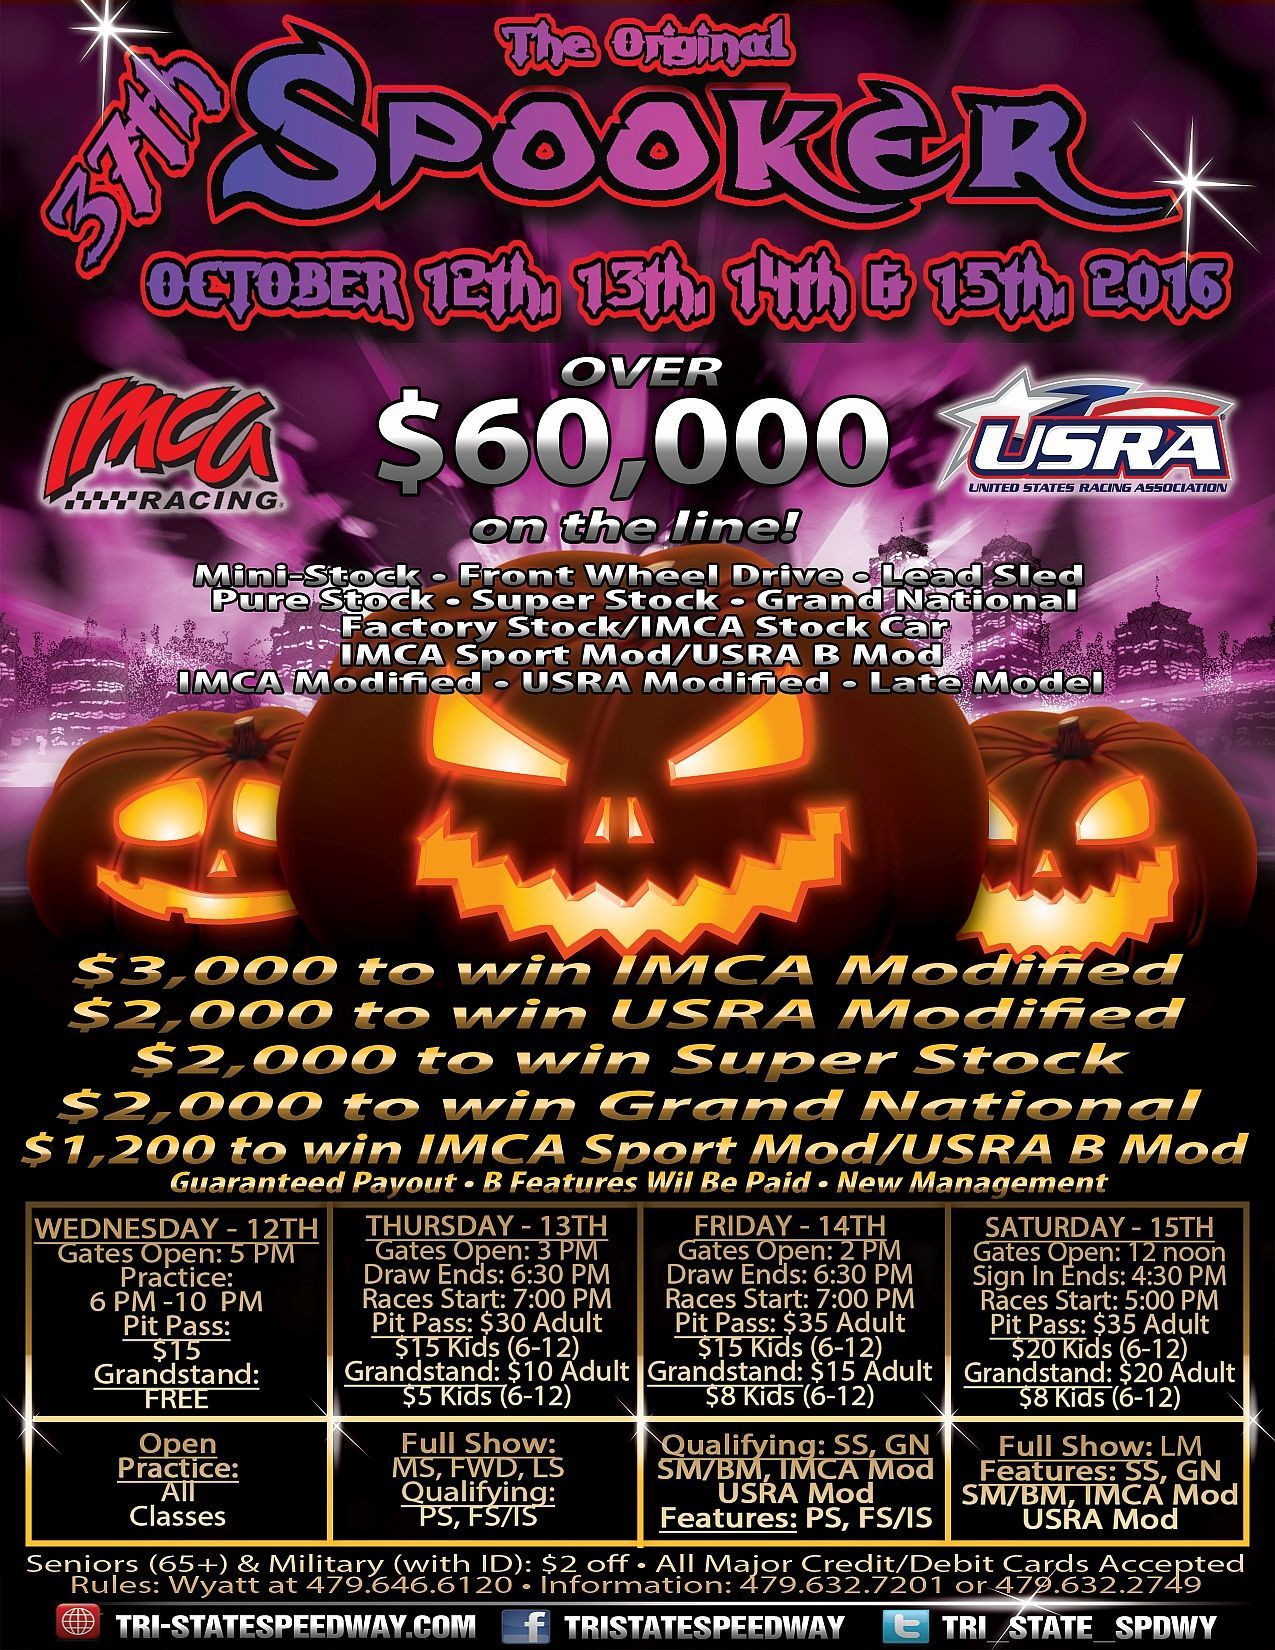 37th Annual Spooker Information Released